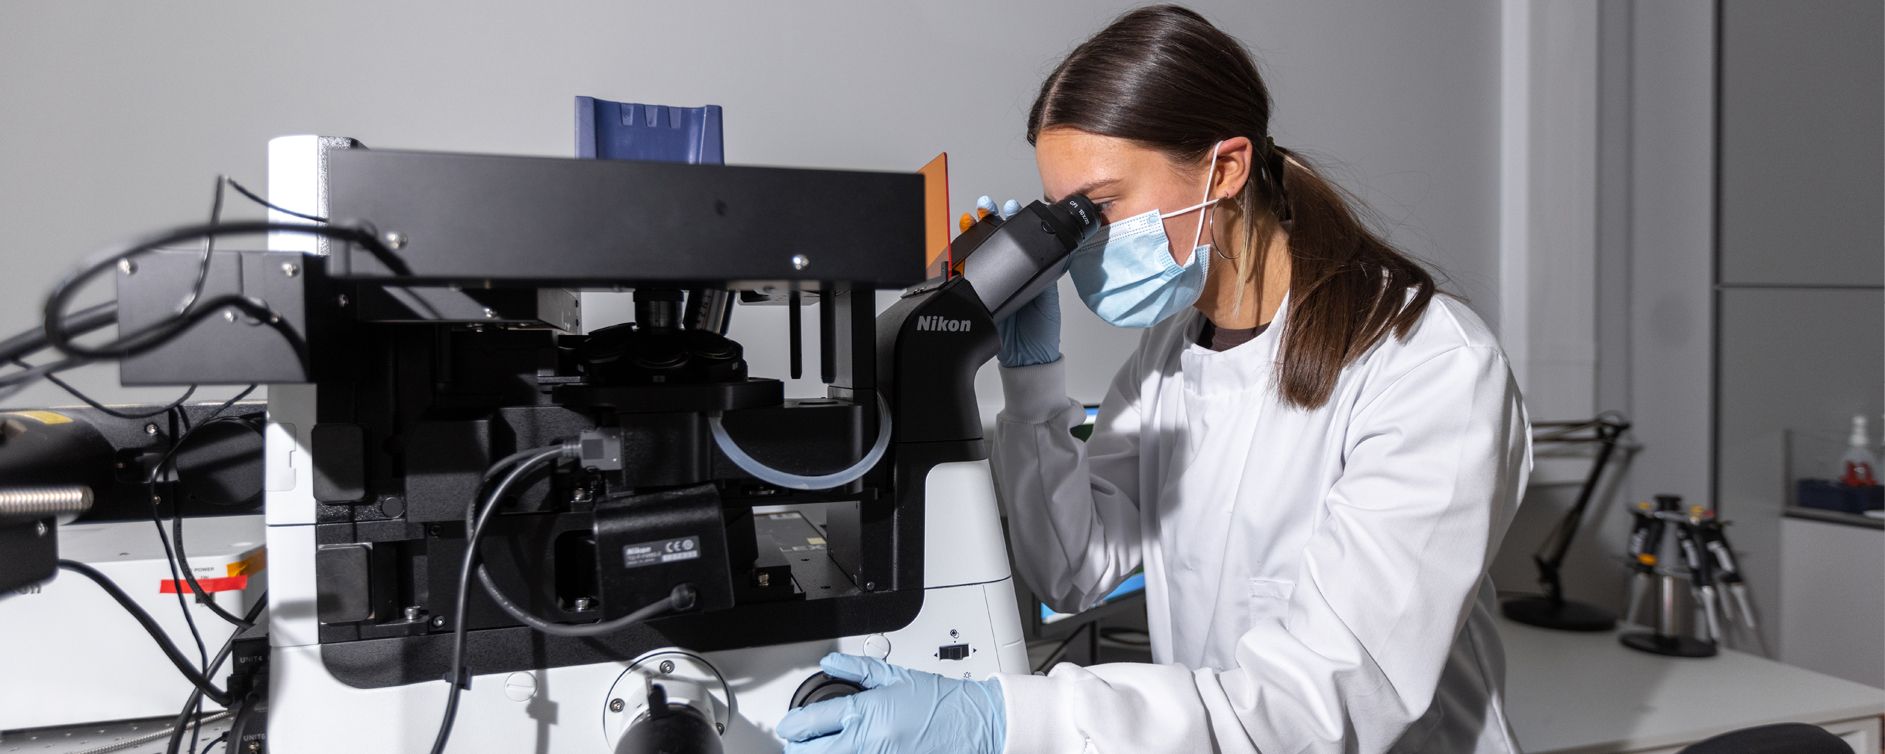 Researcher using the super resolution microscope in the lab